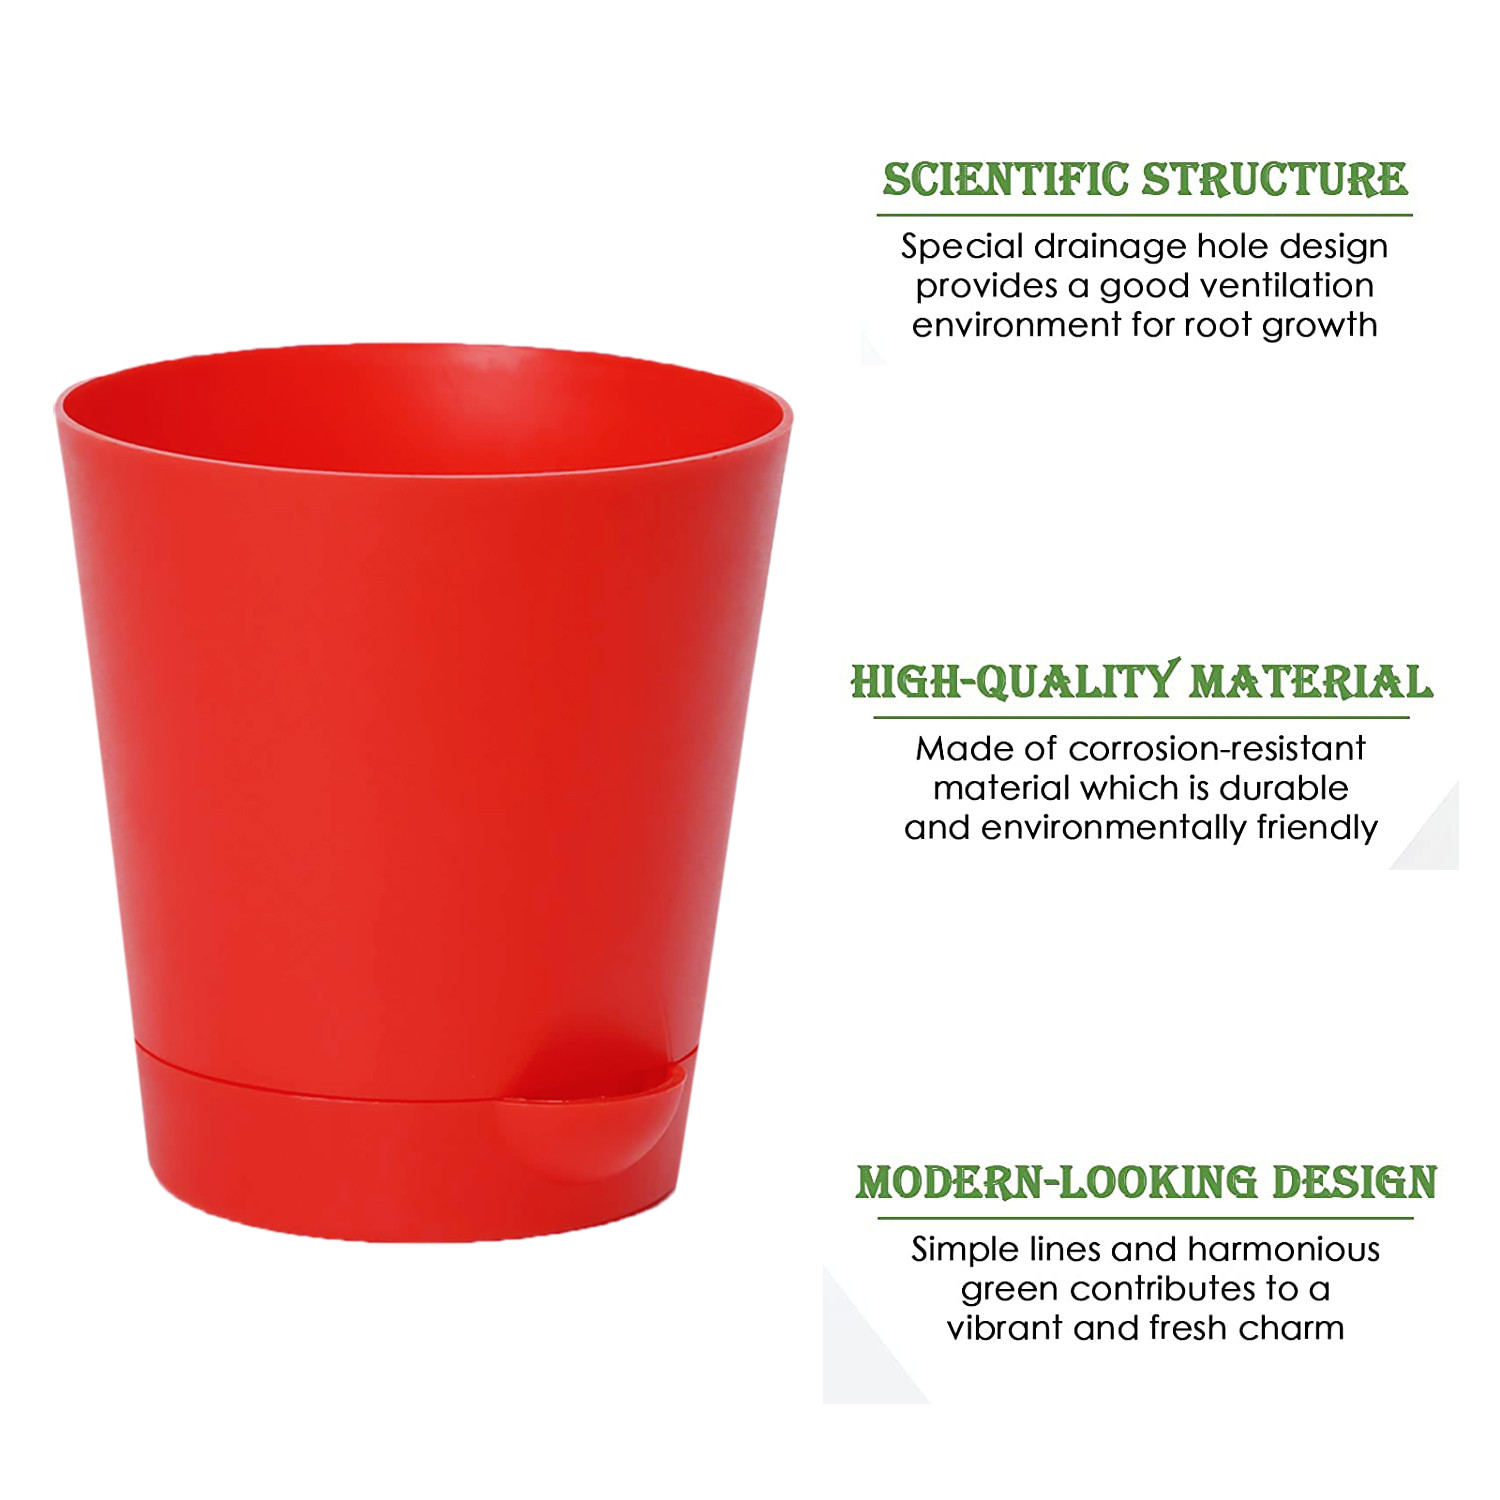 Kuber Industries Plastic Titan Pot|Garden Container For Plants & Flowers|Self-Watering Pot With Drainage Holes,6 Inch (Red)